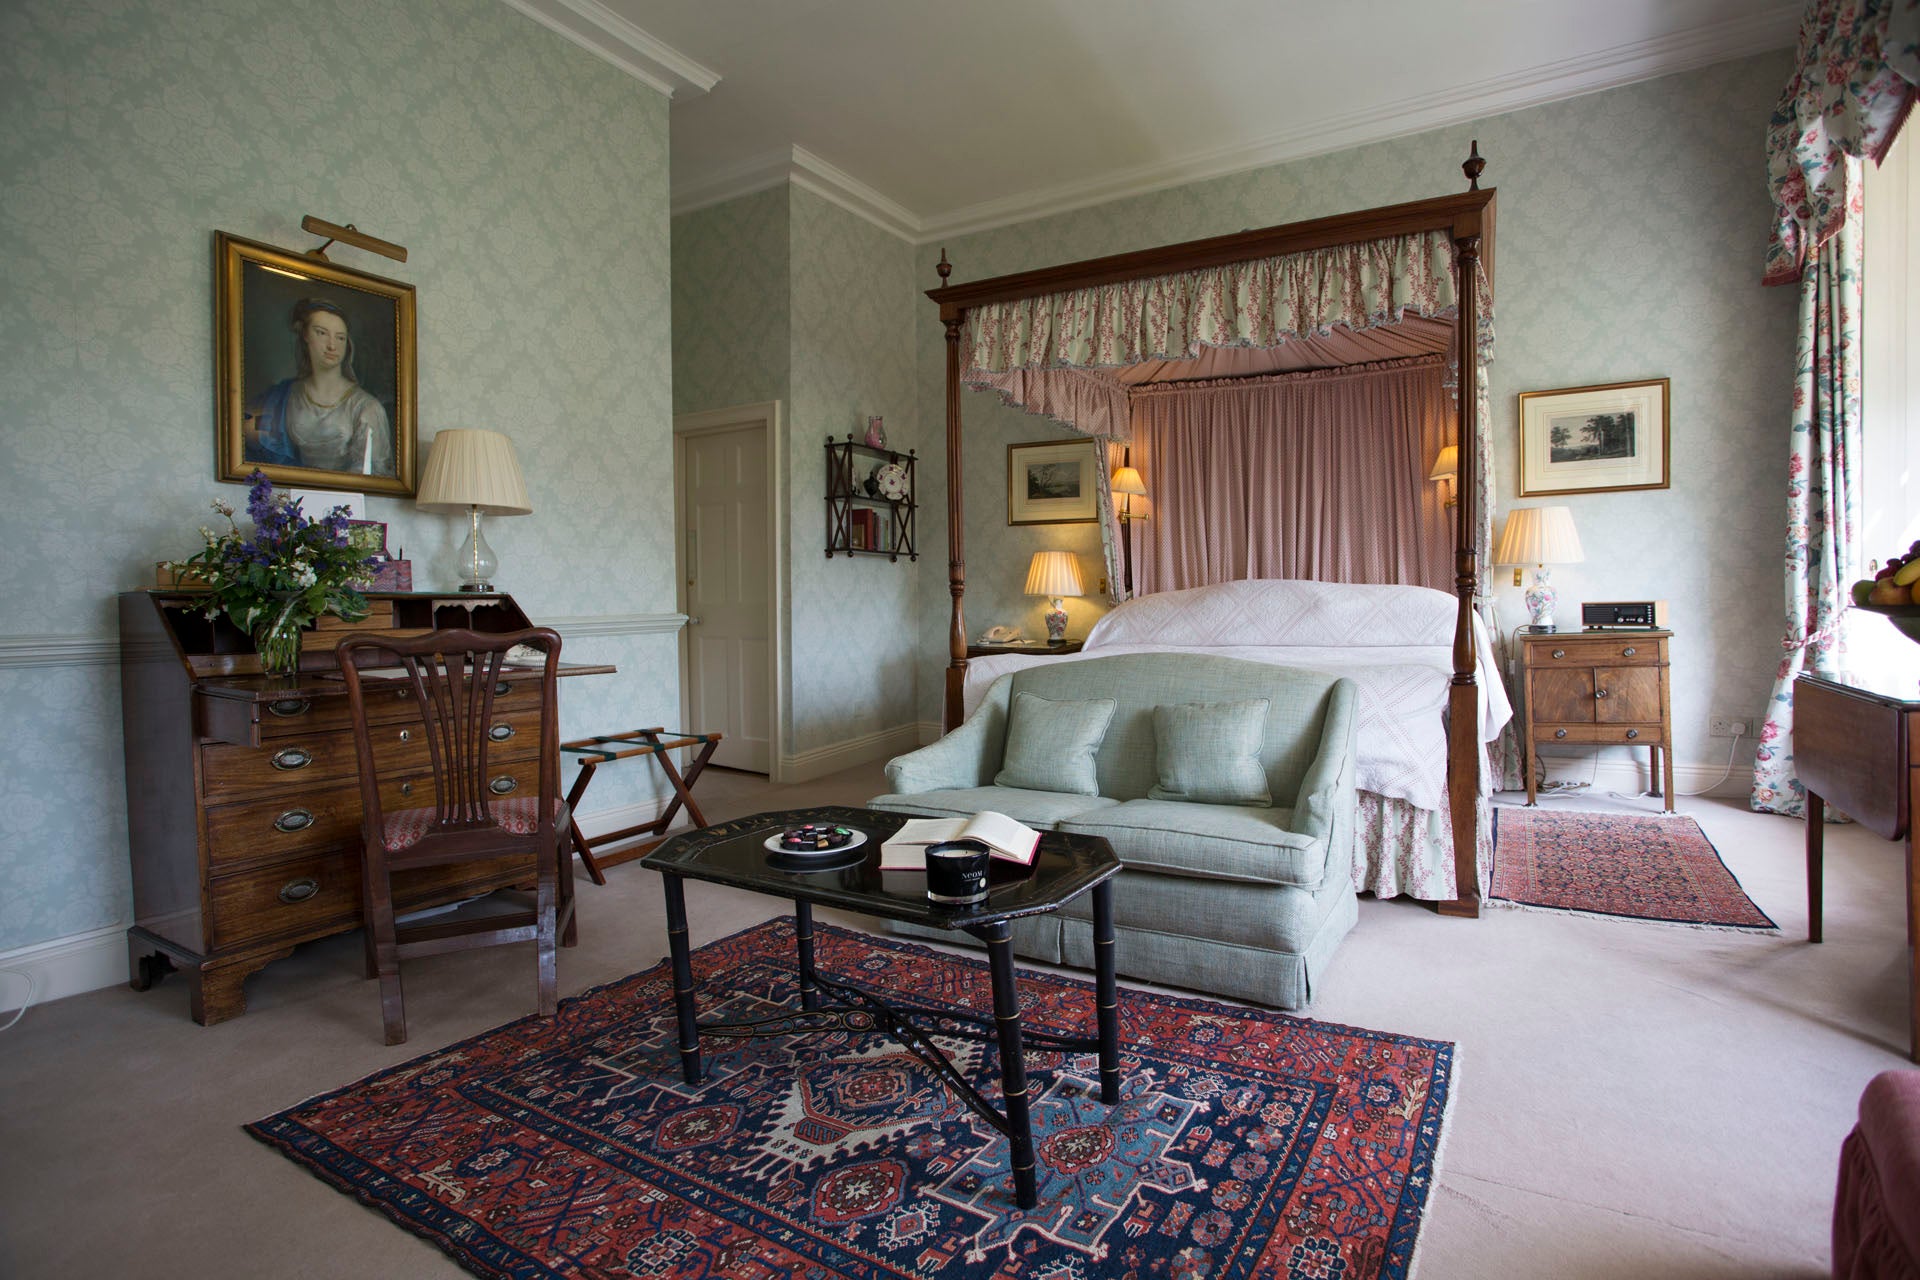 Many rooms at Middlethorpe Hall have four-poster beds